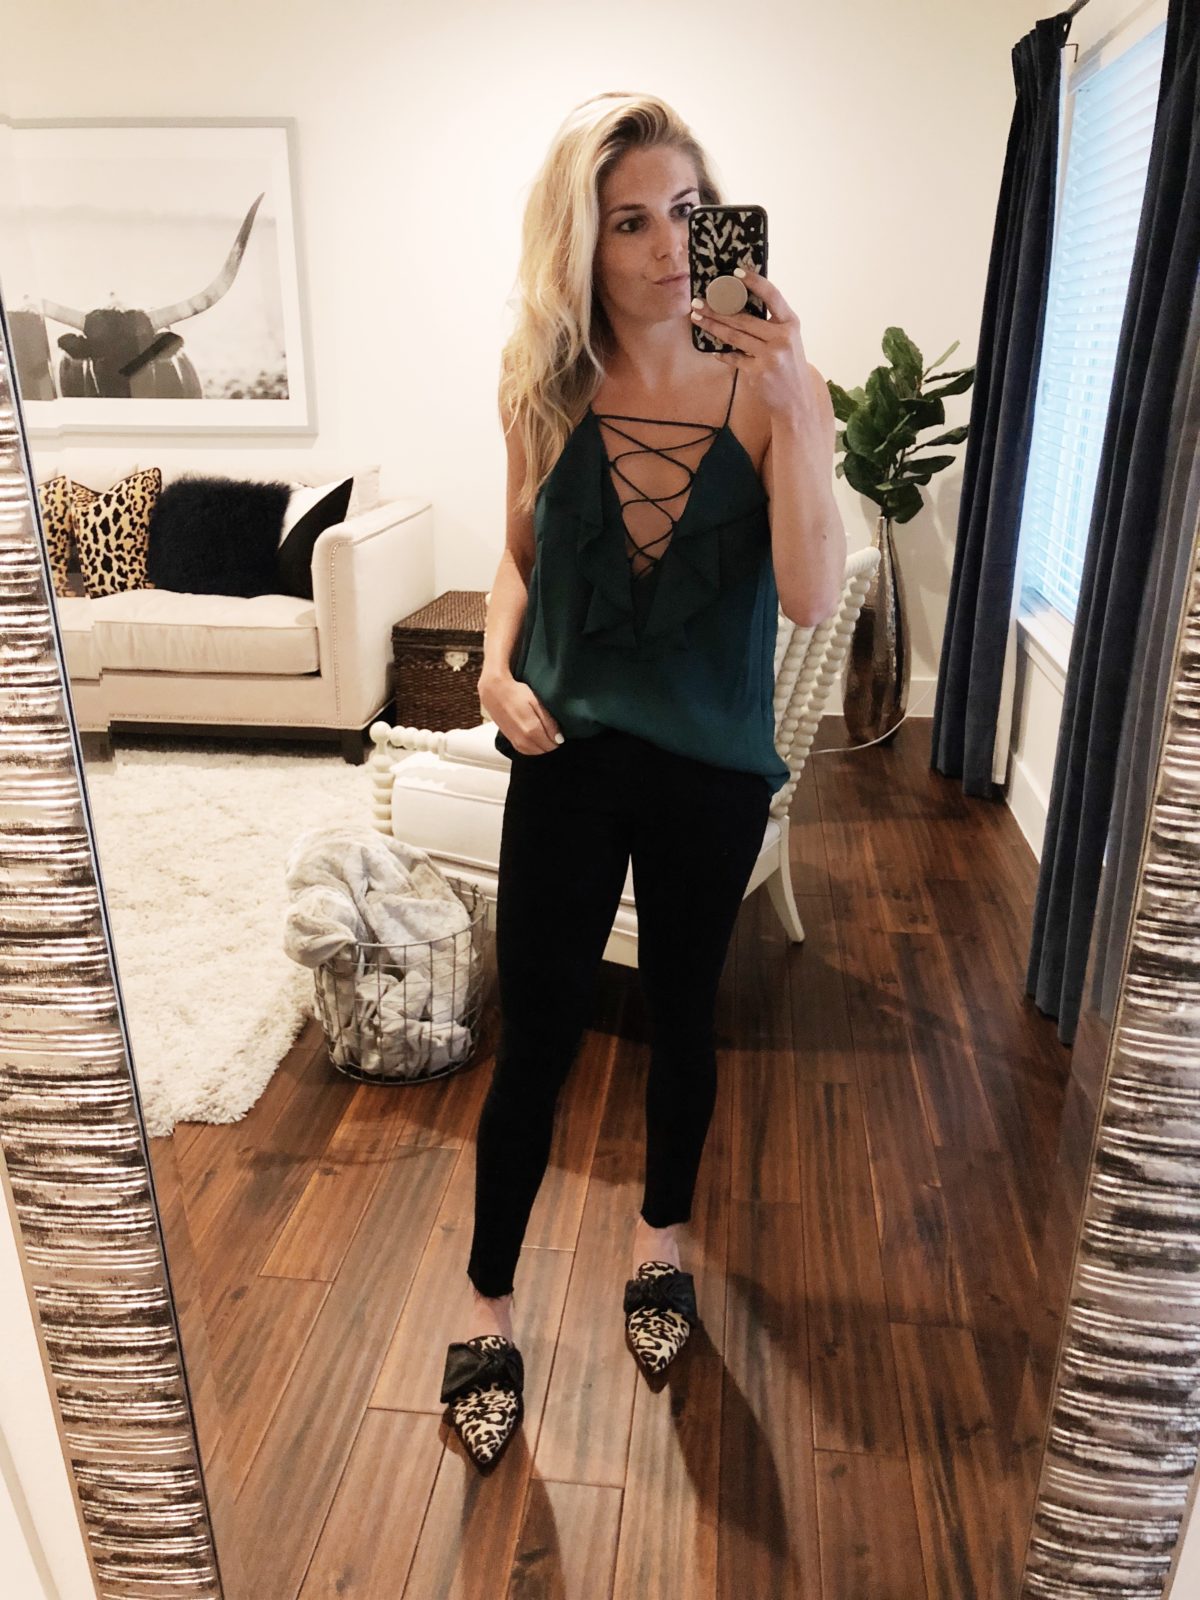 woman wearing WAYF Green Lace-Up Ruffle Cami in Size M (go a size up), Rag & Bone Black Jeans in Size 25 and Louiso Et Cie Leopard Flats  in Size 7 1/2